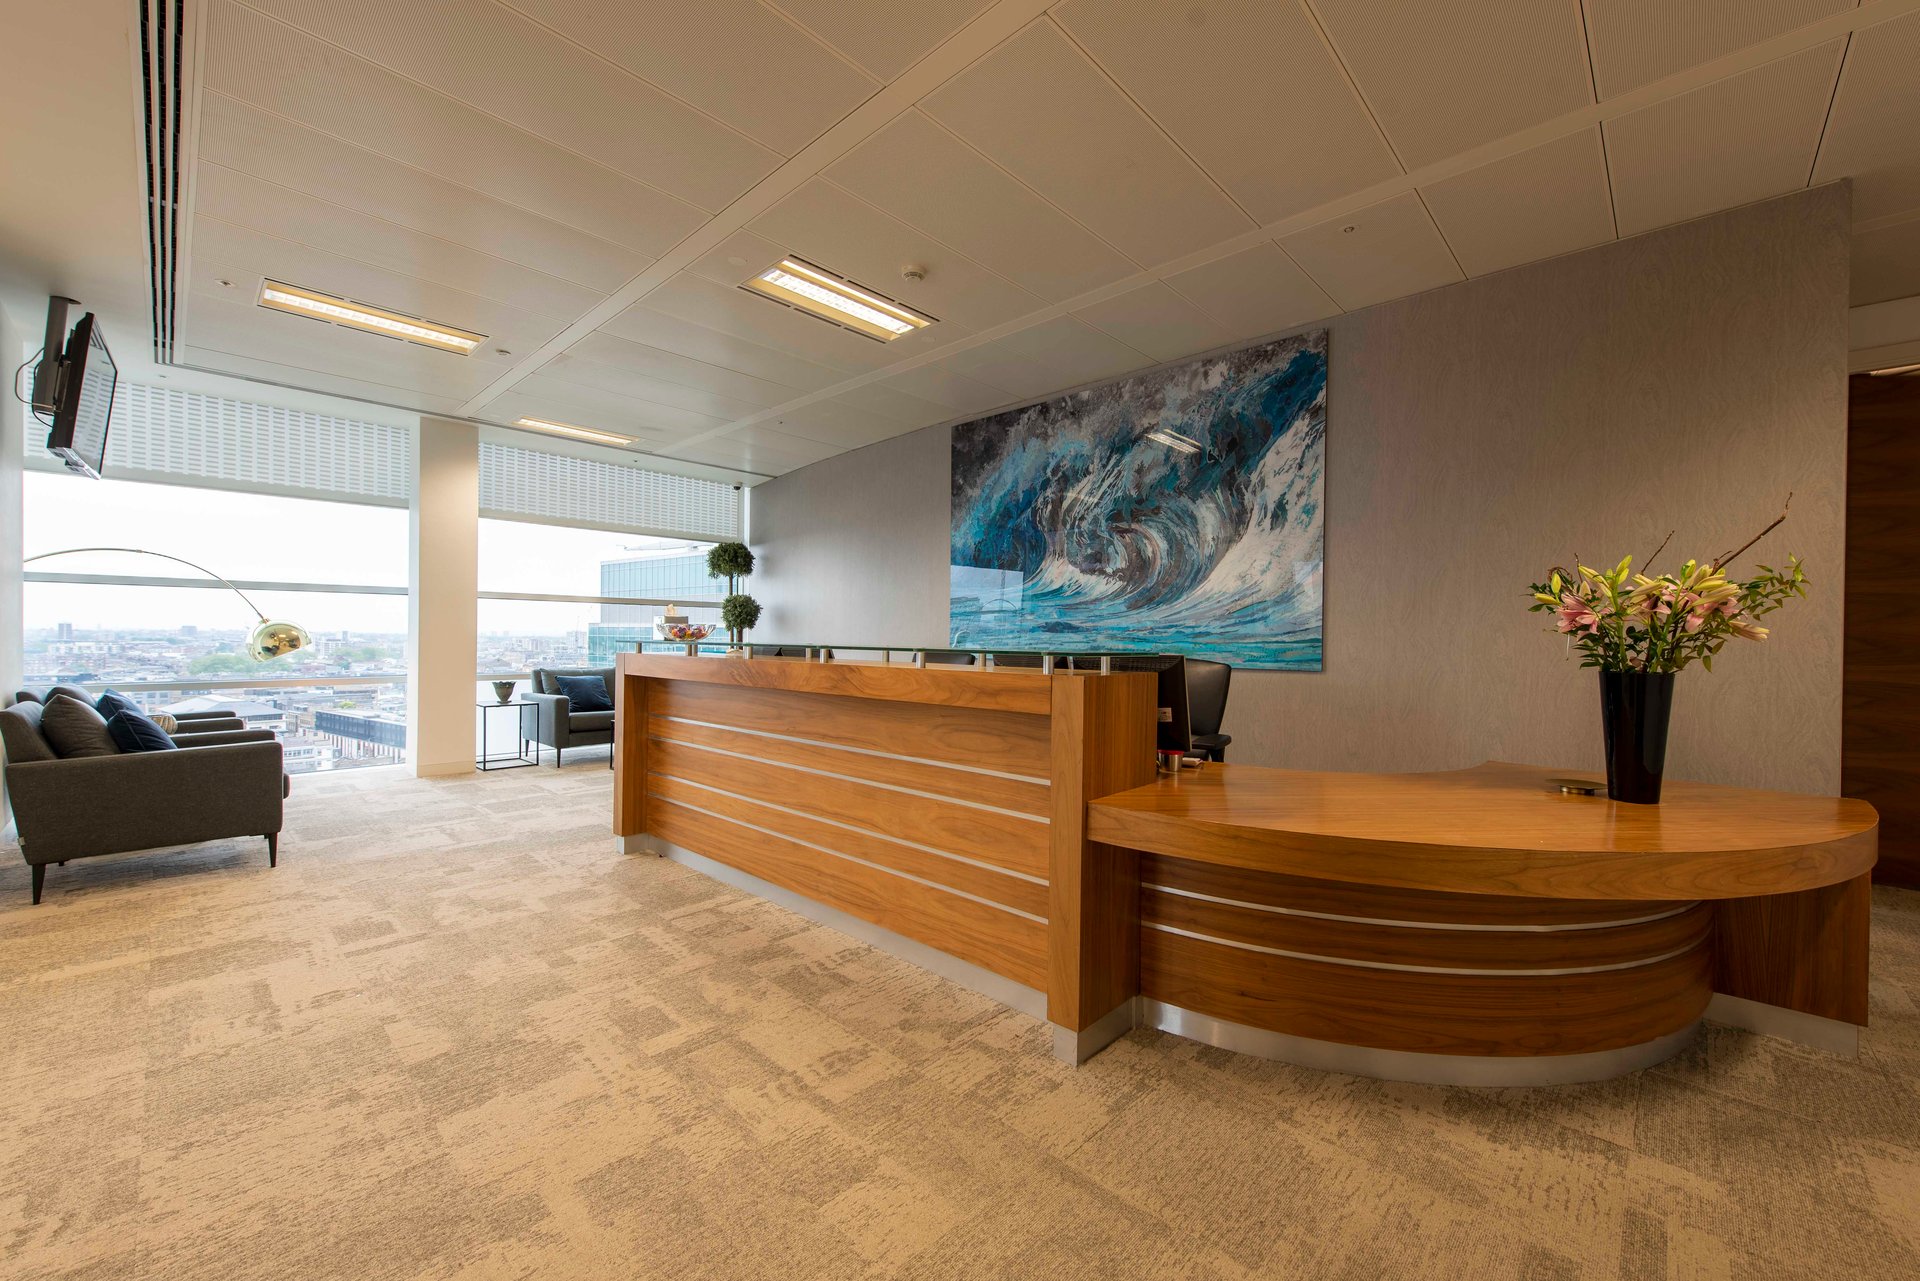 Interior of Bourne Offices - 30 Crown Place